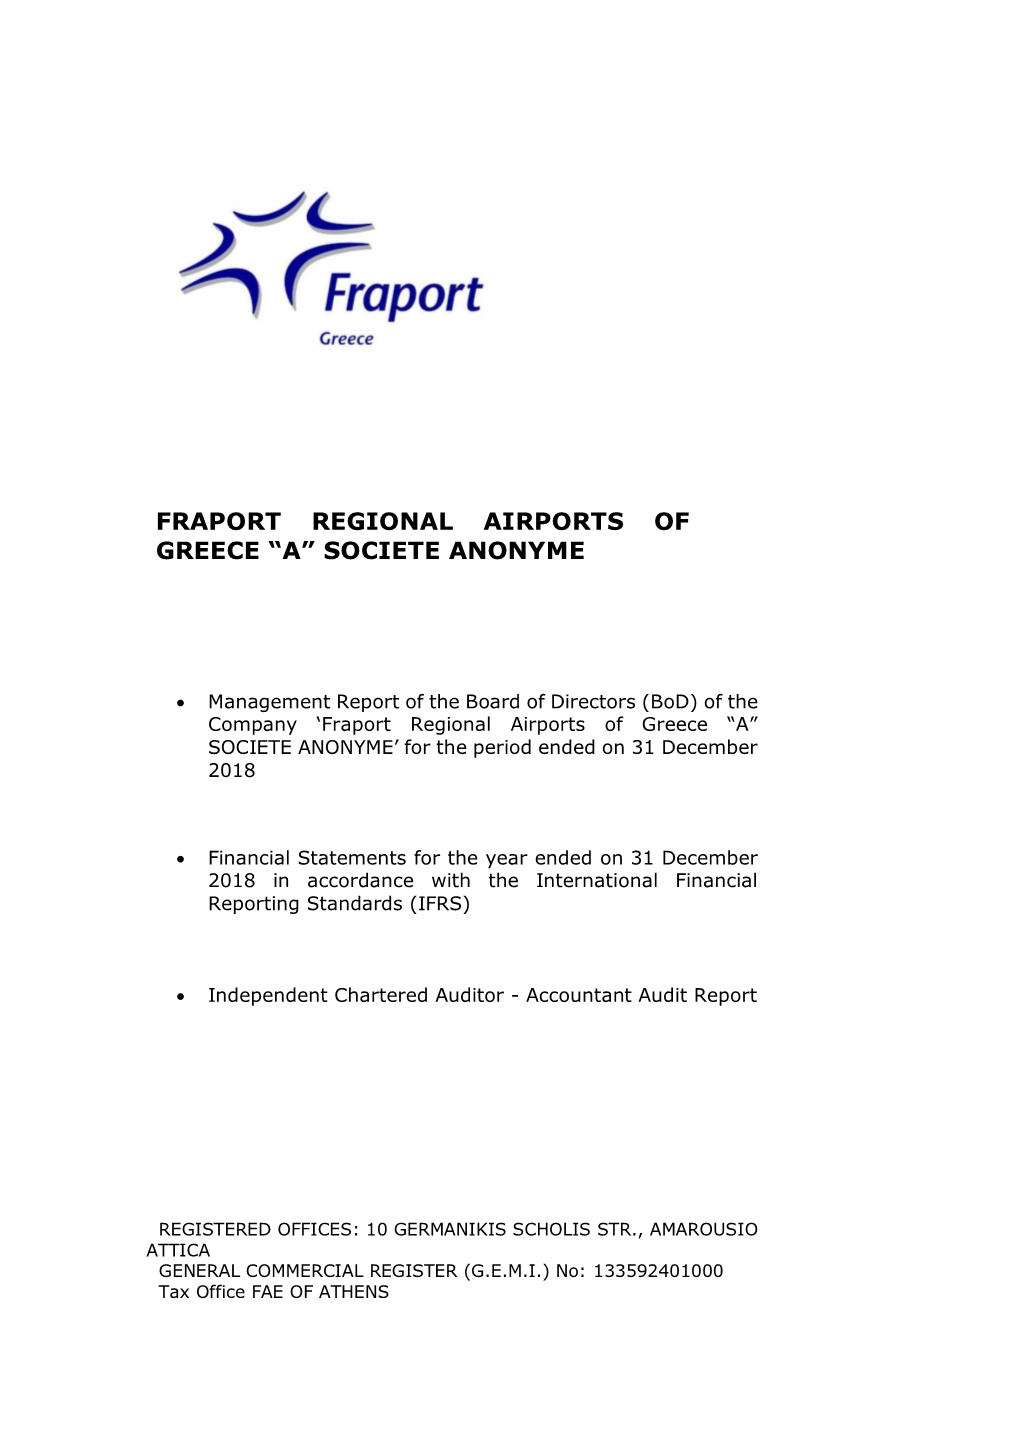 Fraport Regional Airports of Greece “A” Societe Anonyme